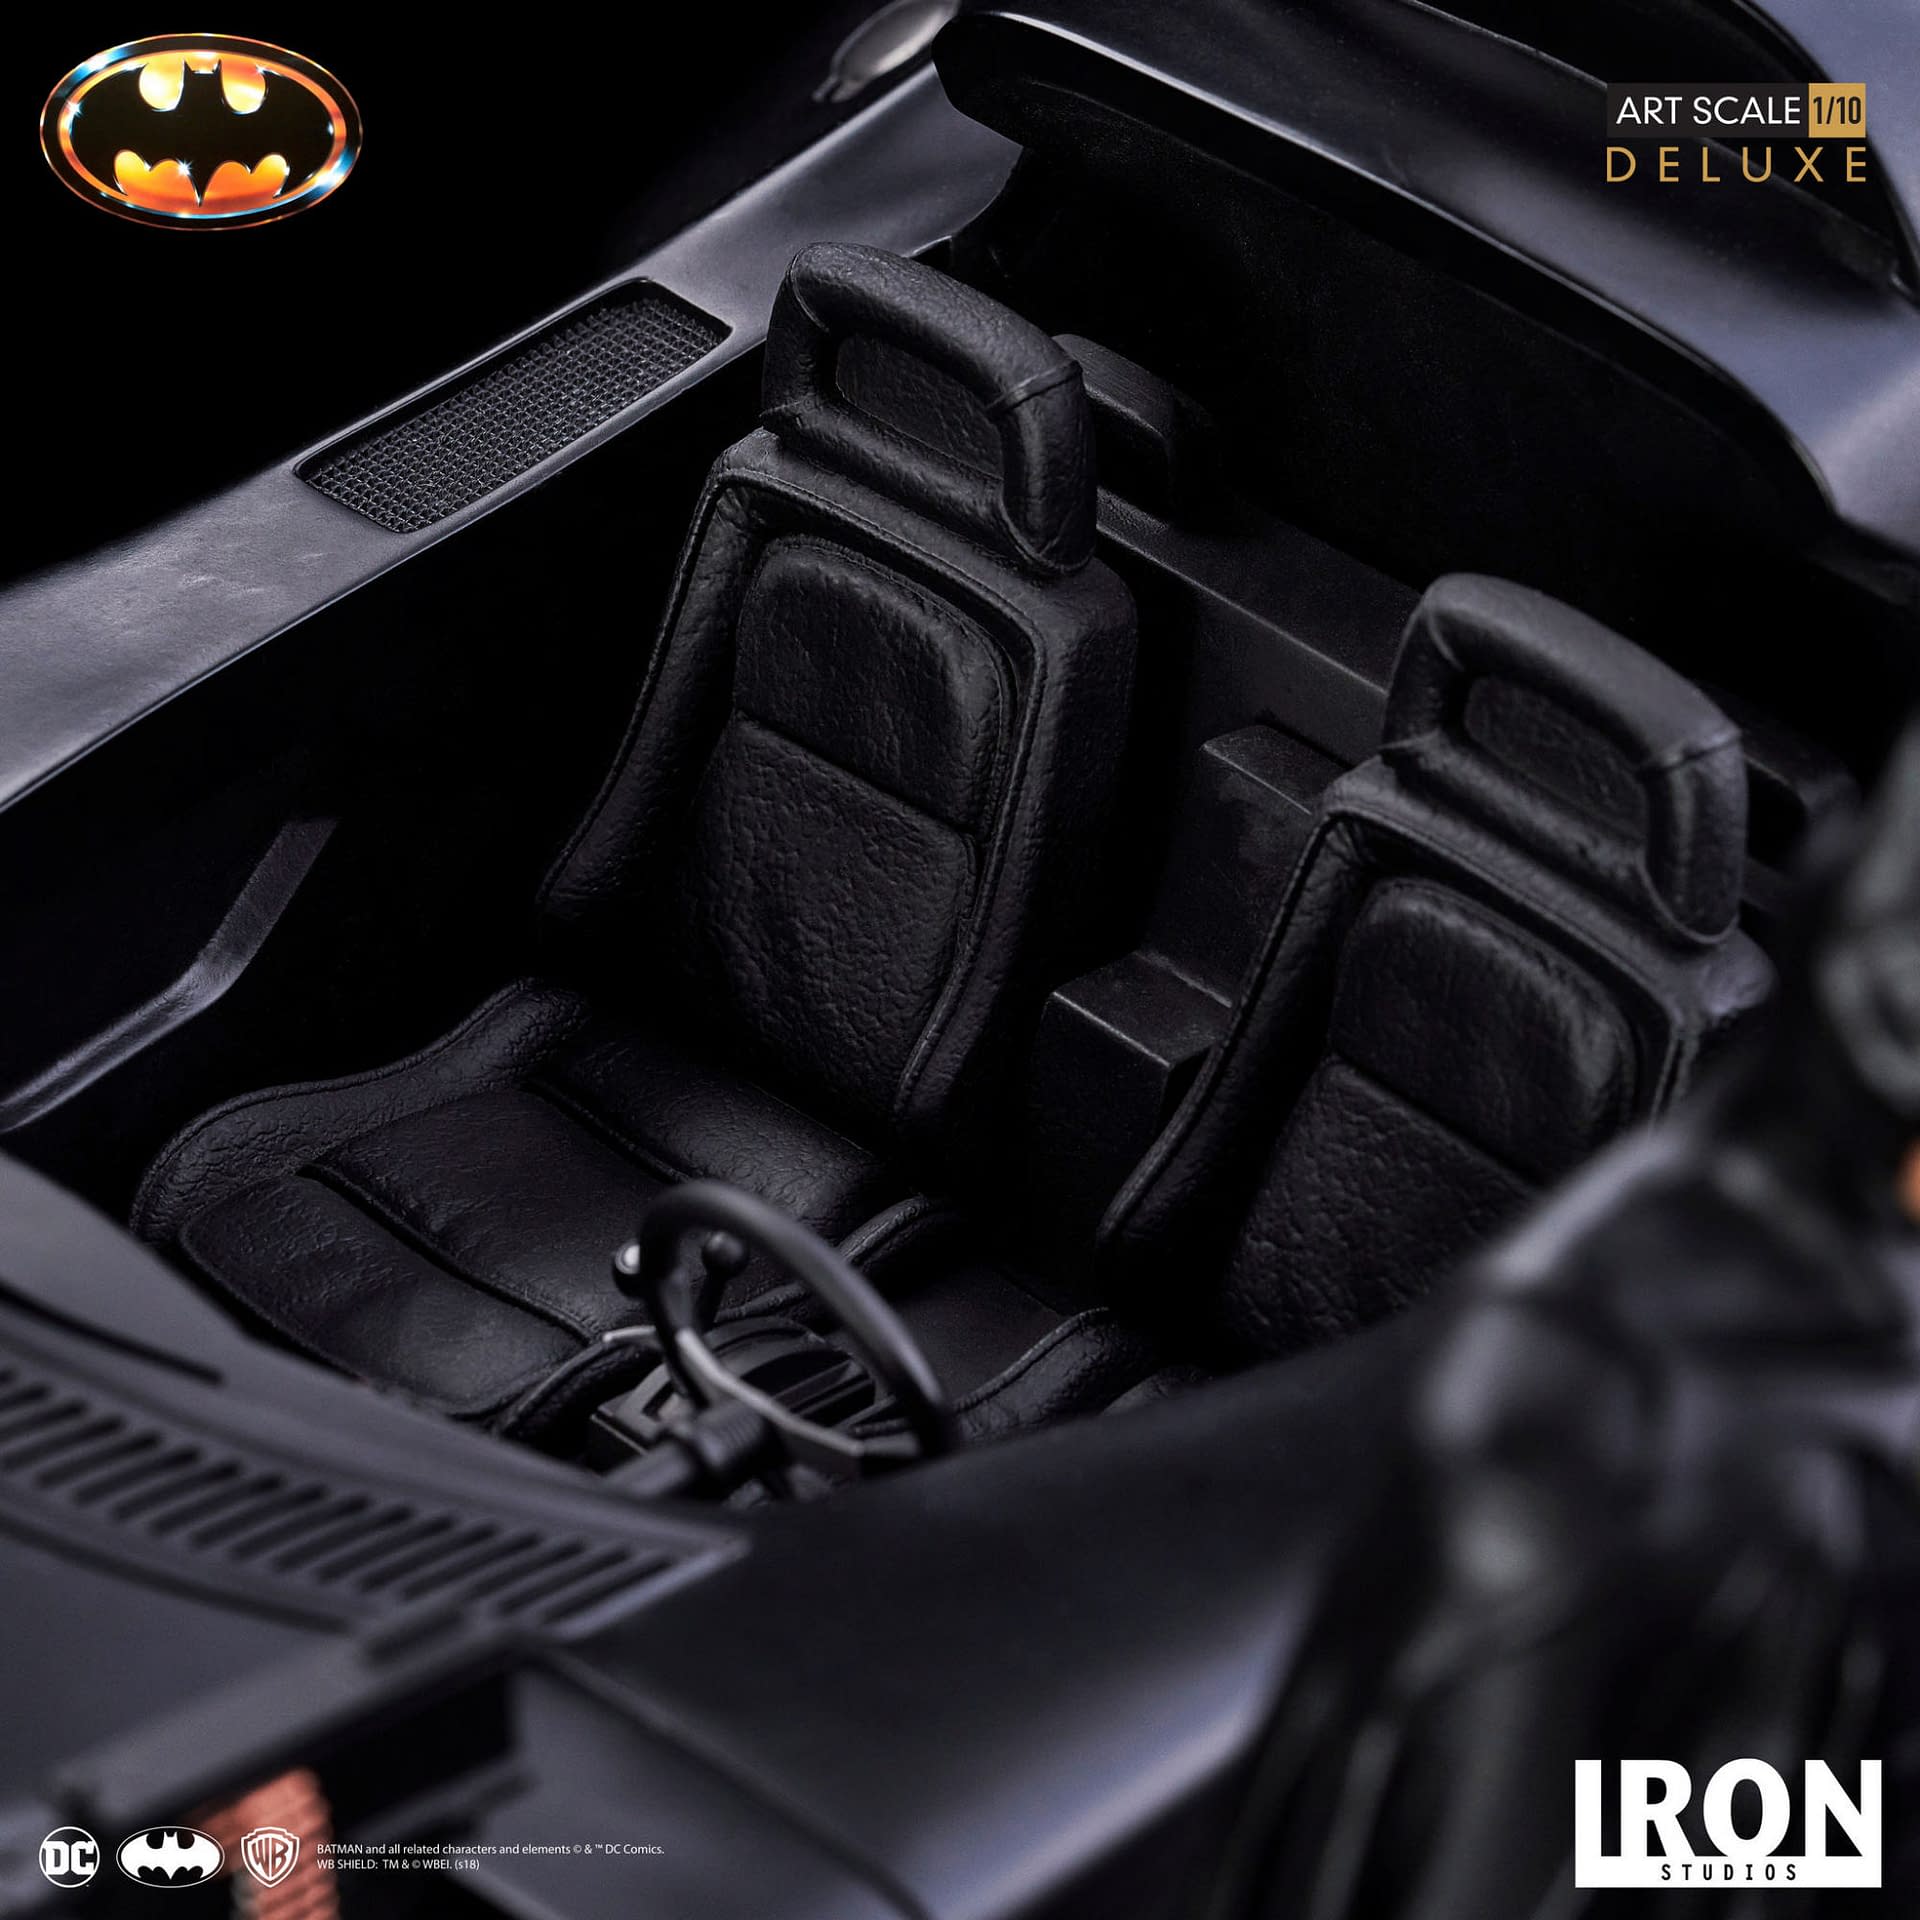 "Batmobile 89" Hits the Streets Again With New Iron Studios Art Scale